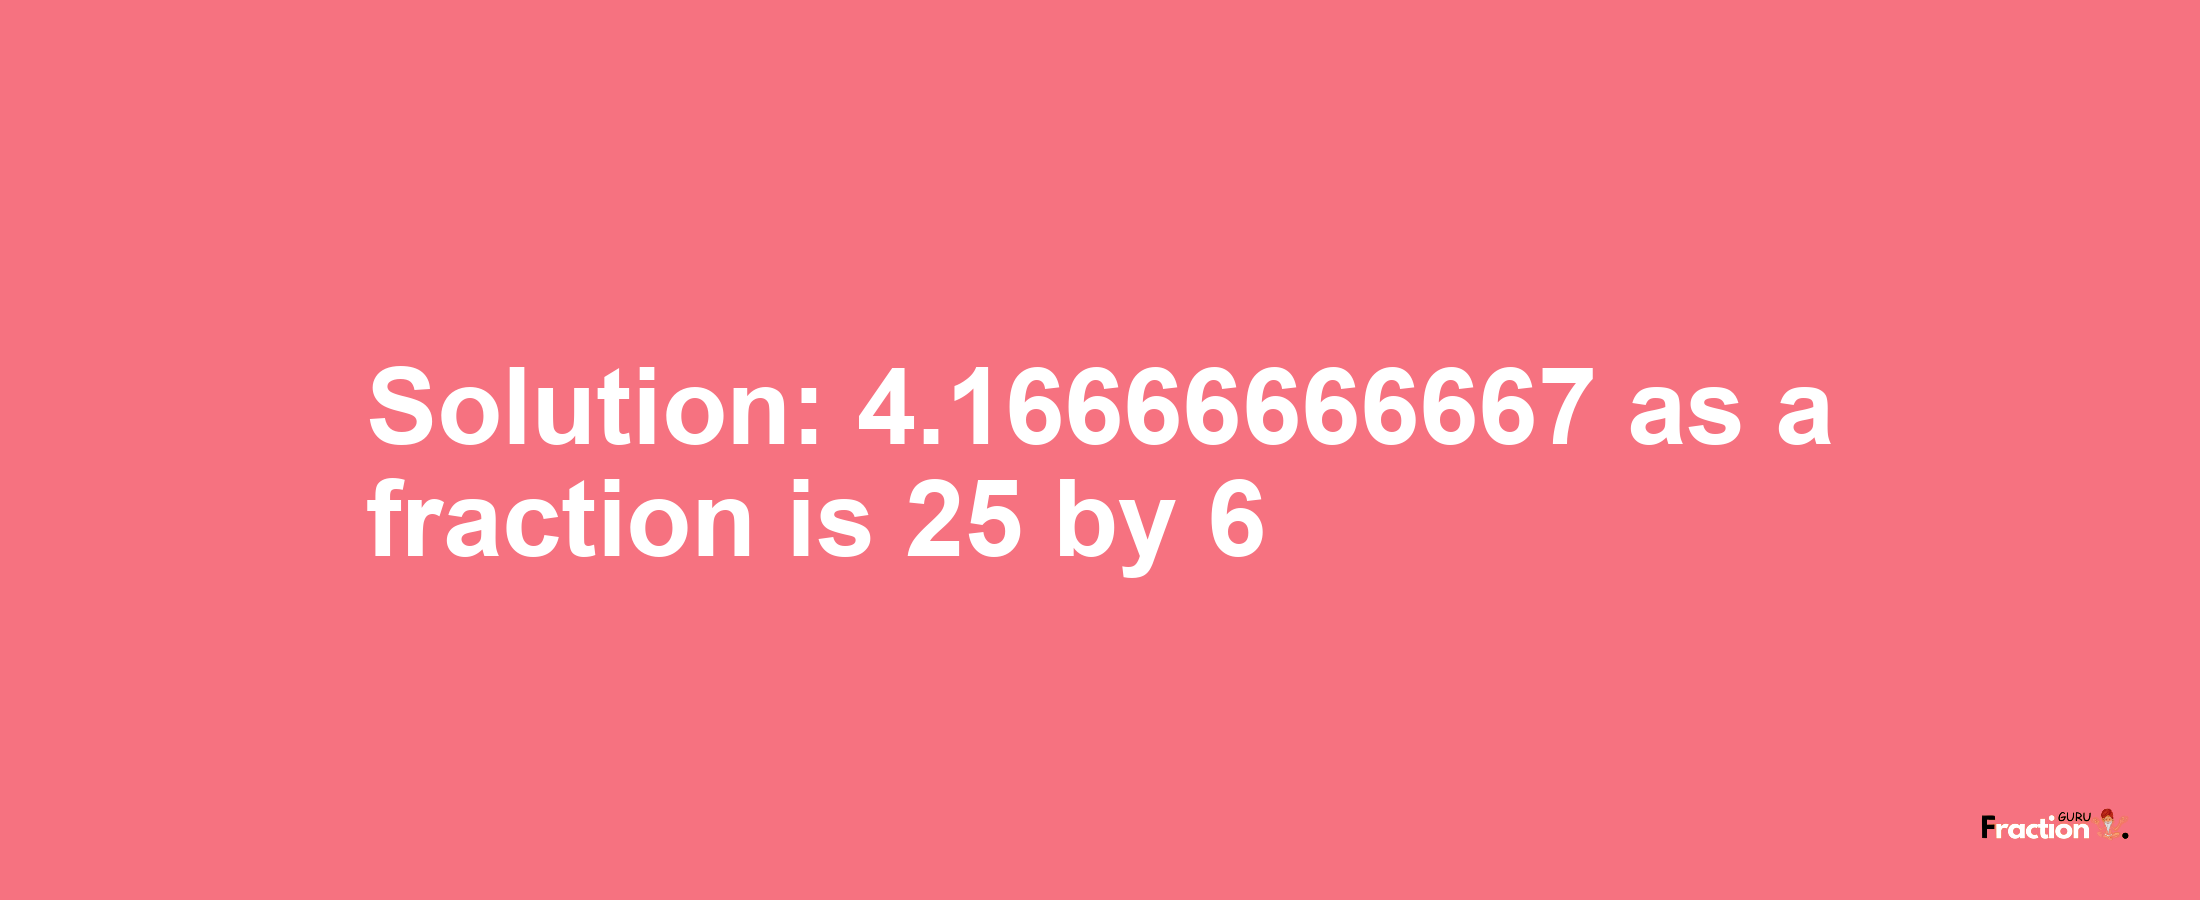 Solution:4.16666666667 as a fraction is 25/6